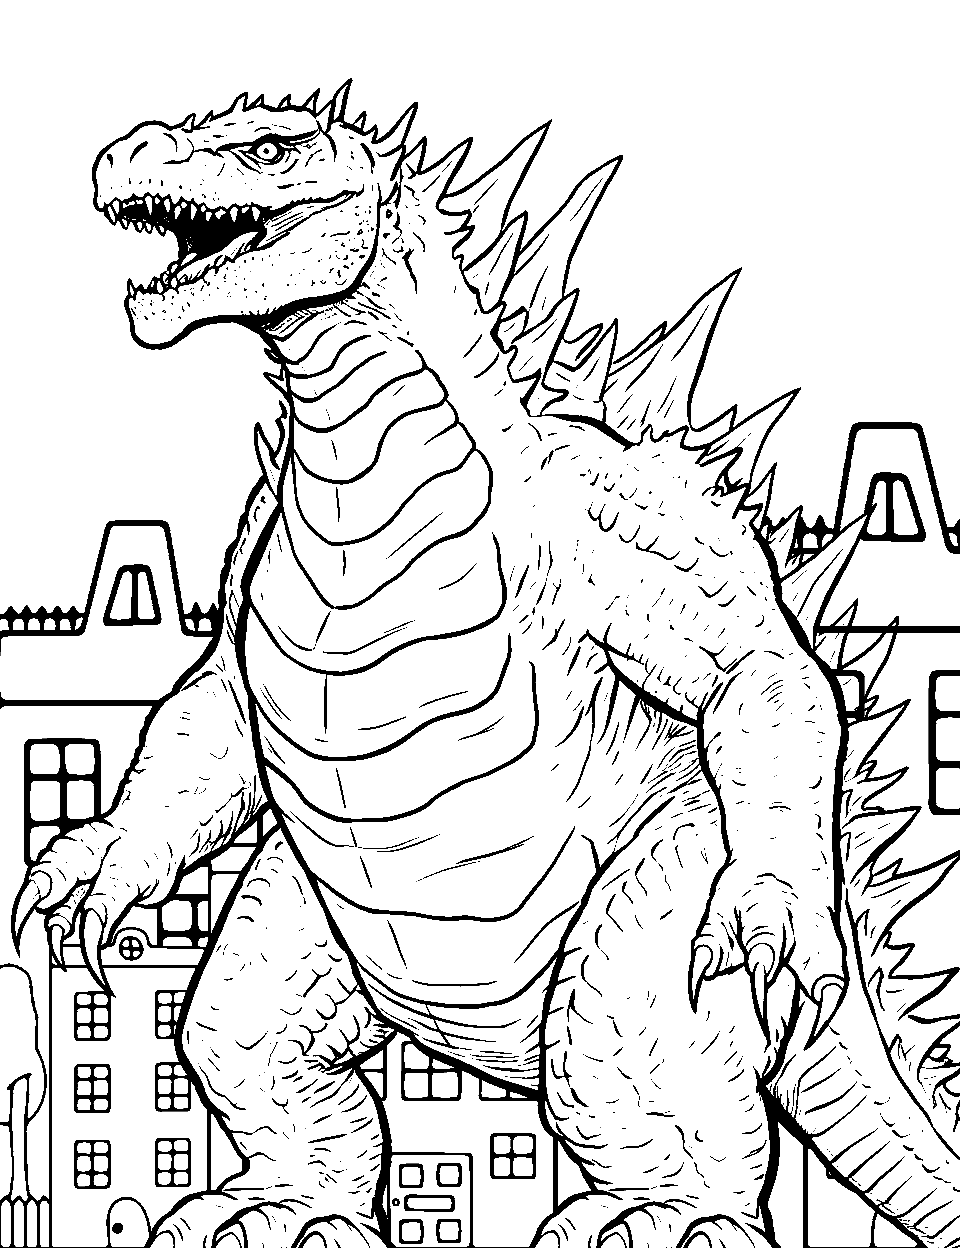 Godzilla Roaming the City Monster Coloring Page - Godzilla walking through a cityscape, with buildings surrounding it.